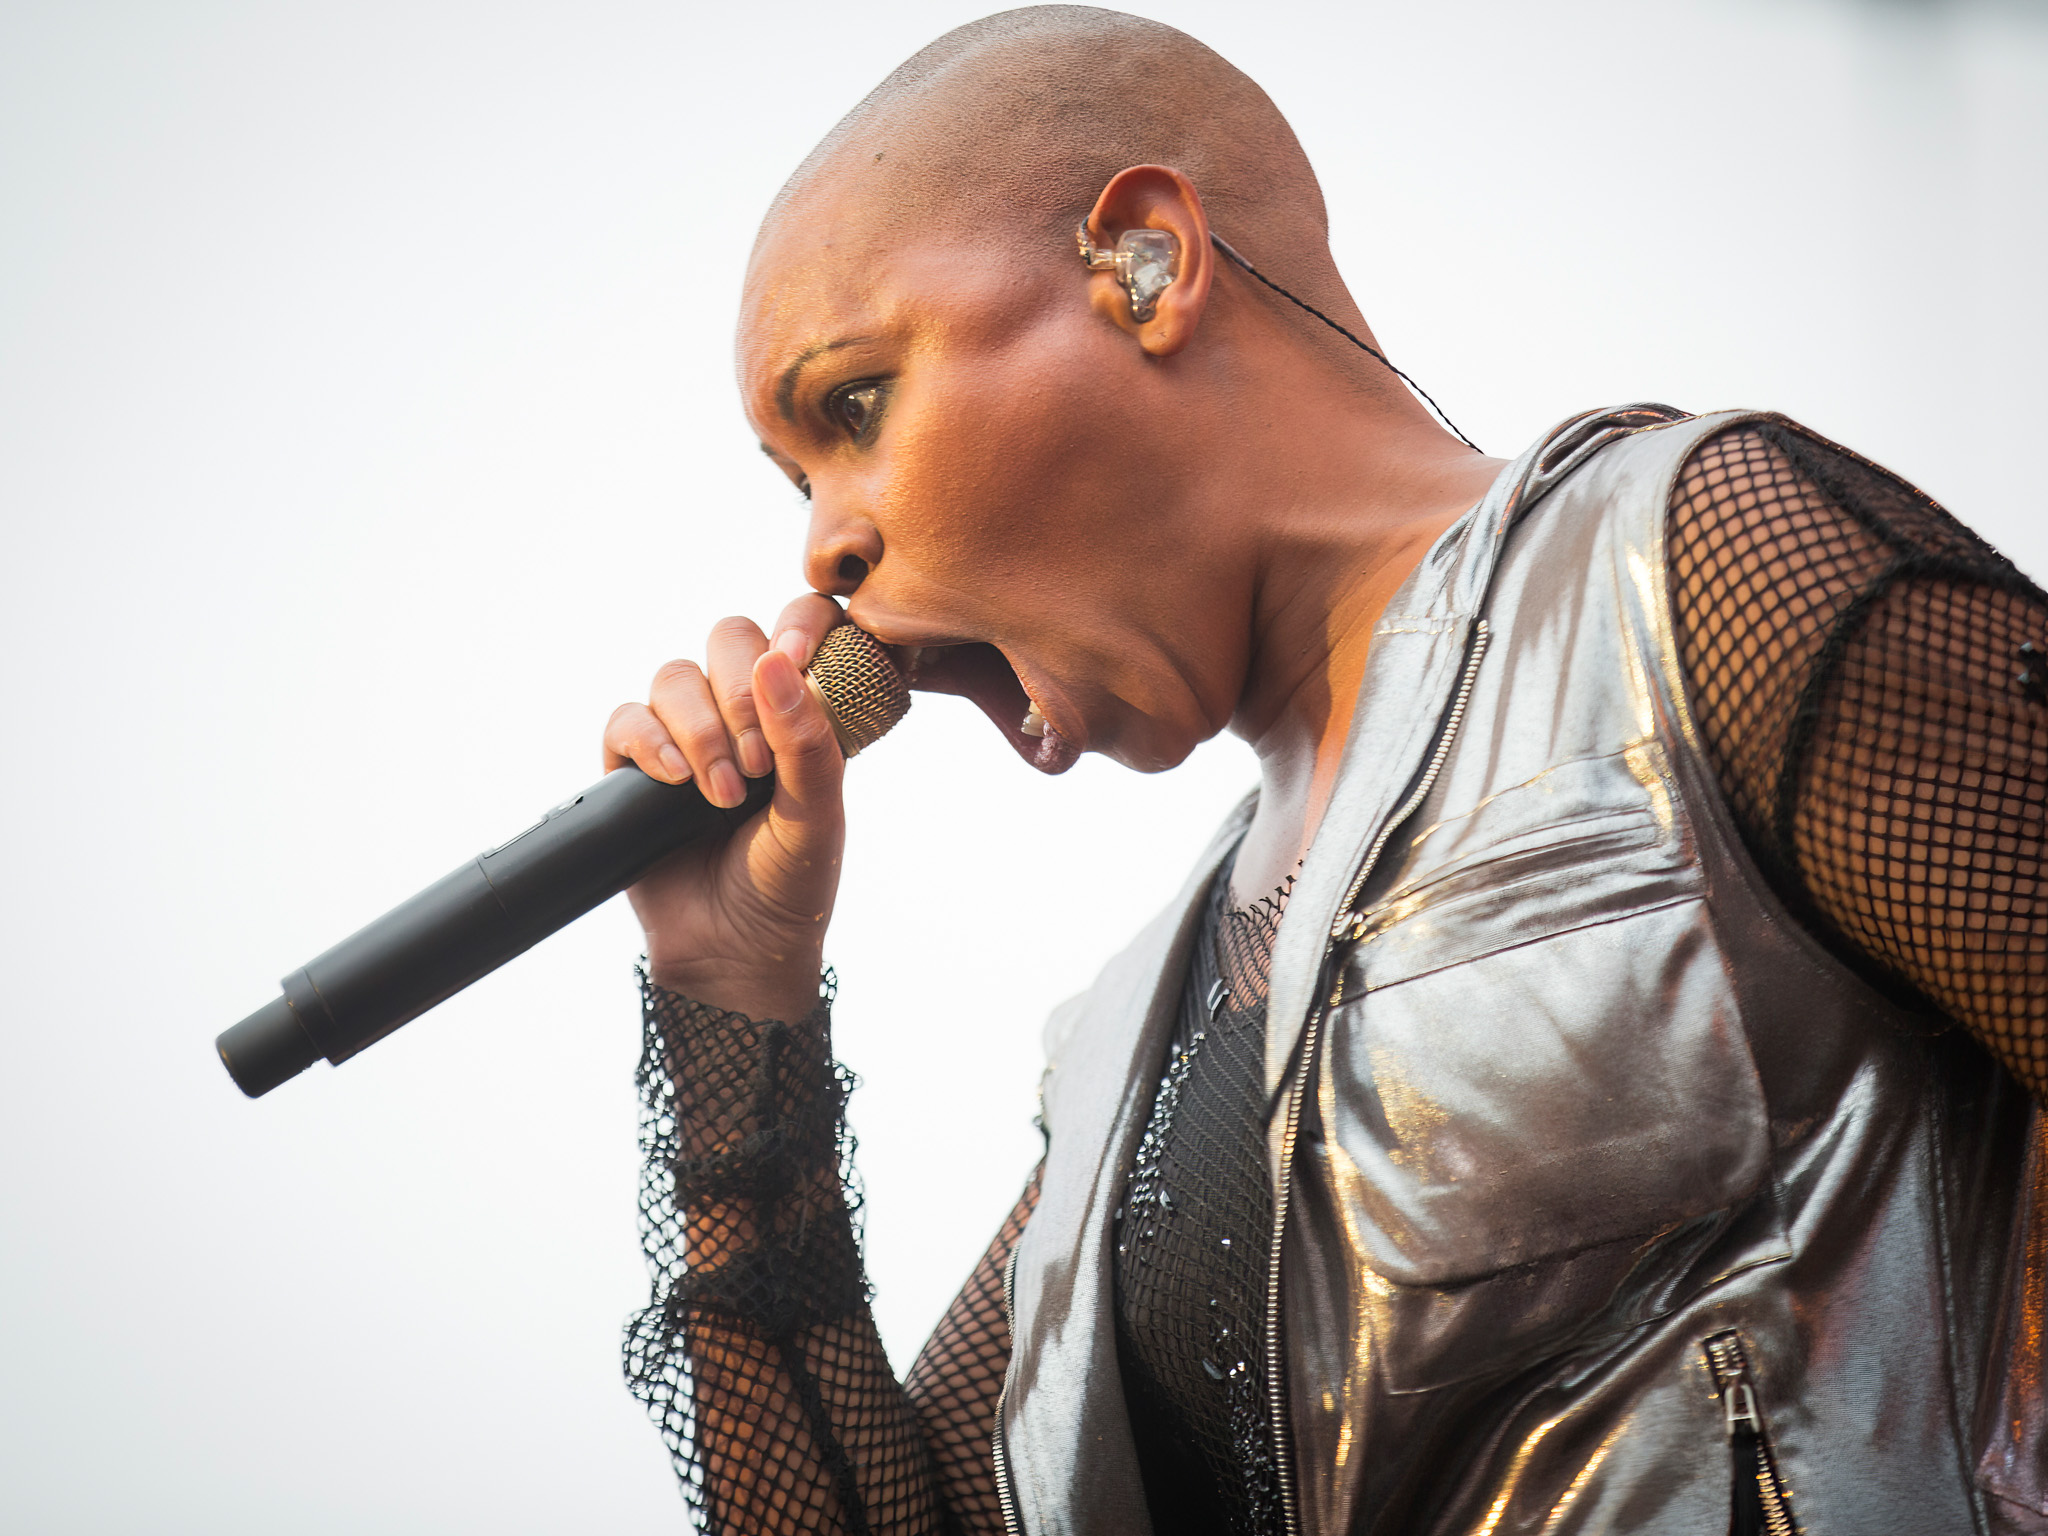 Skunk Anansie by Bullet-ray Photography